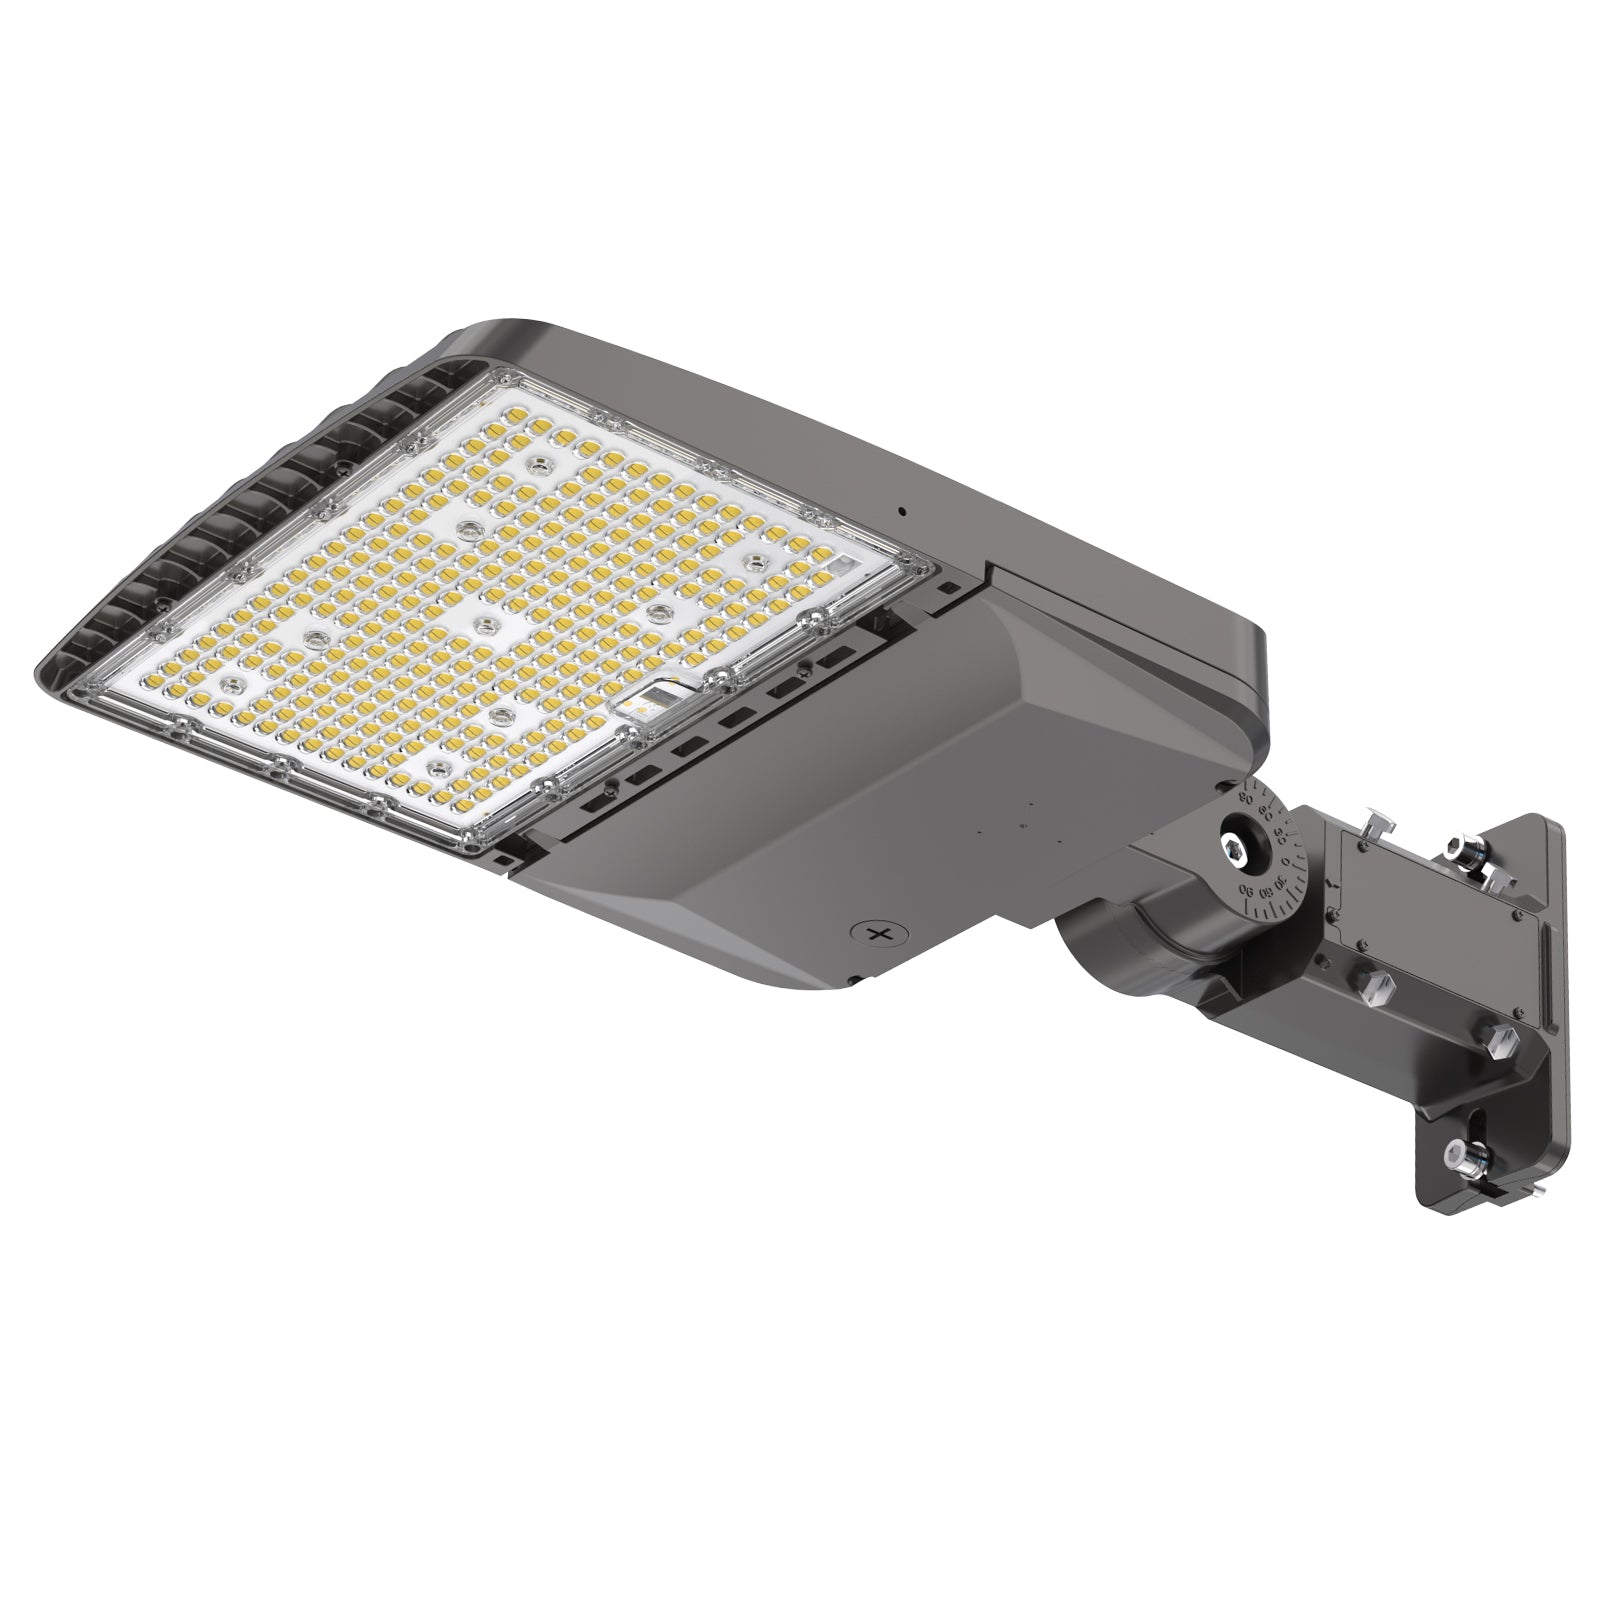 Contractor's Pick - XALH Series Area Light - With Shortcap, Selectable Wattage & CCT, AC 120V-277V, 80W-310W